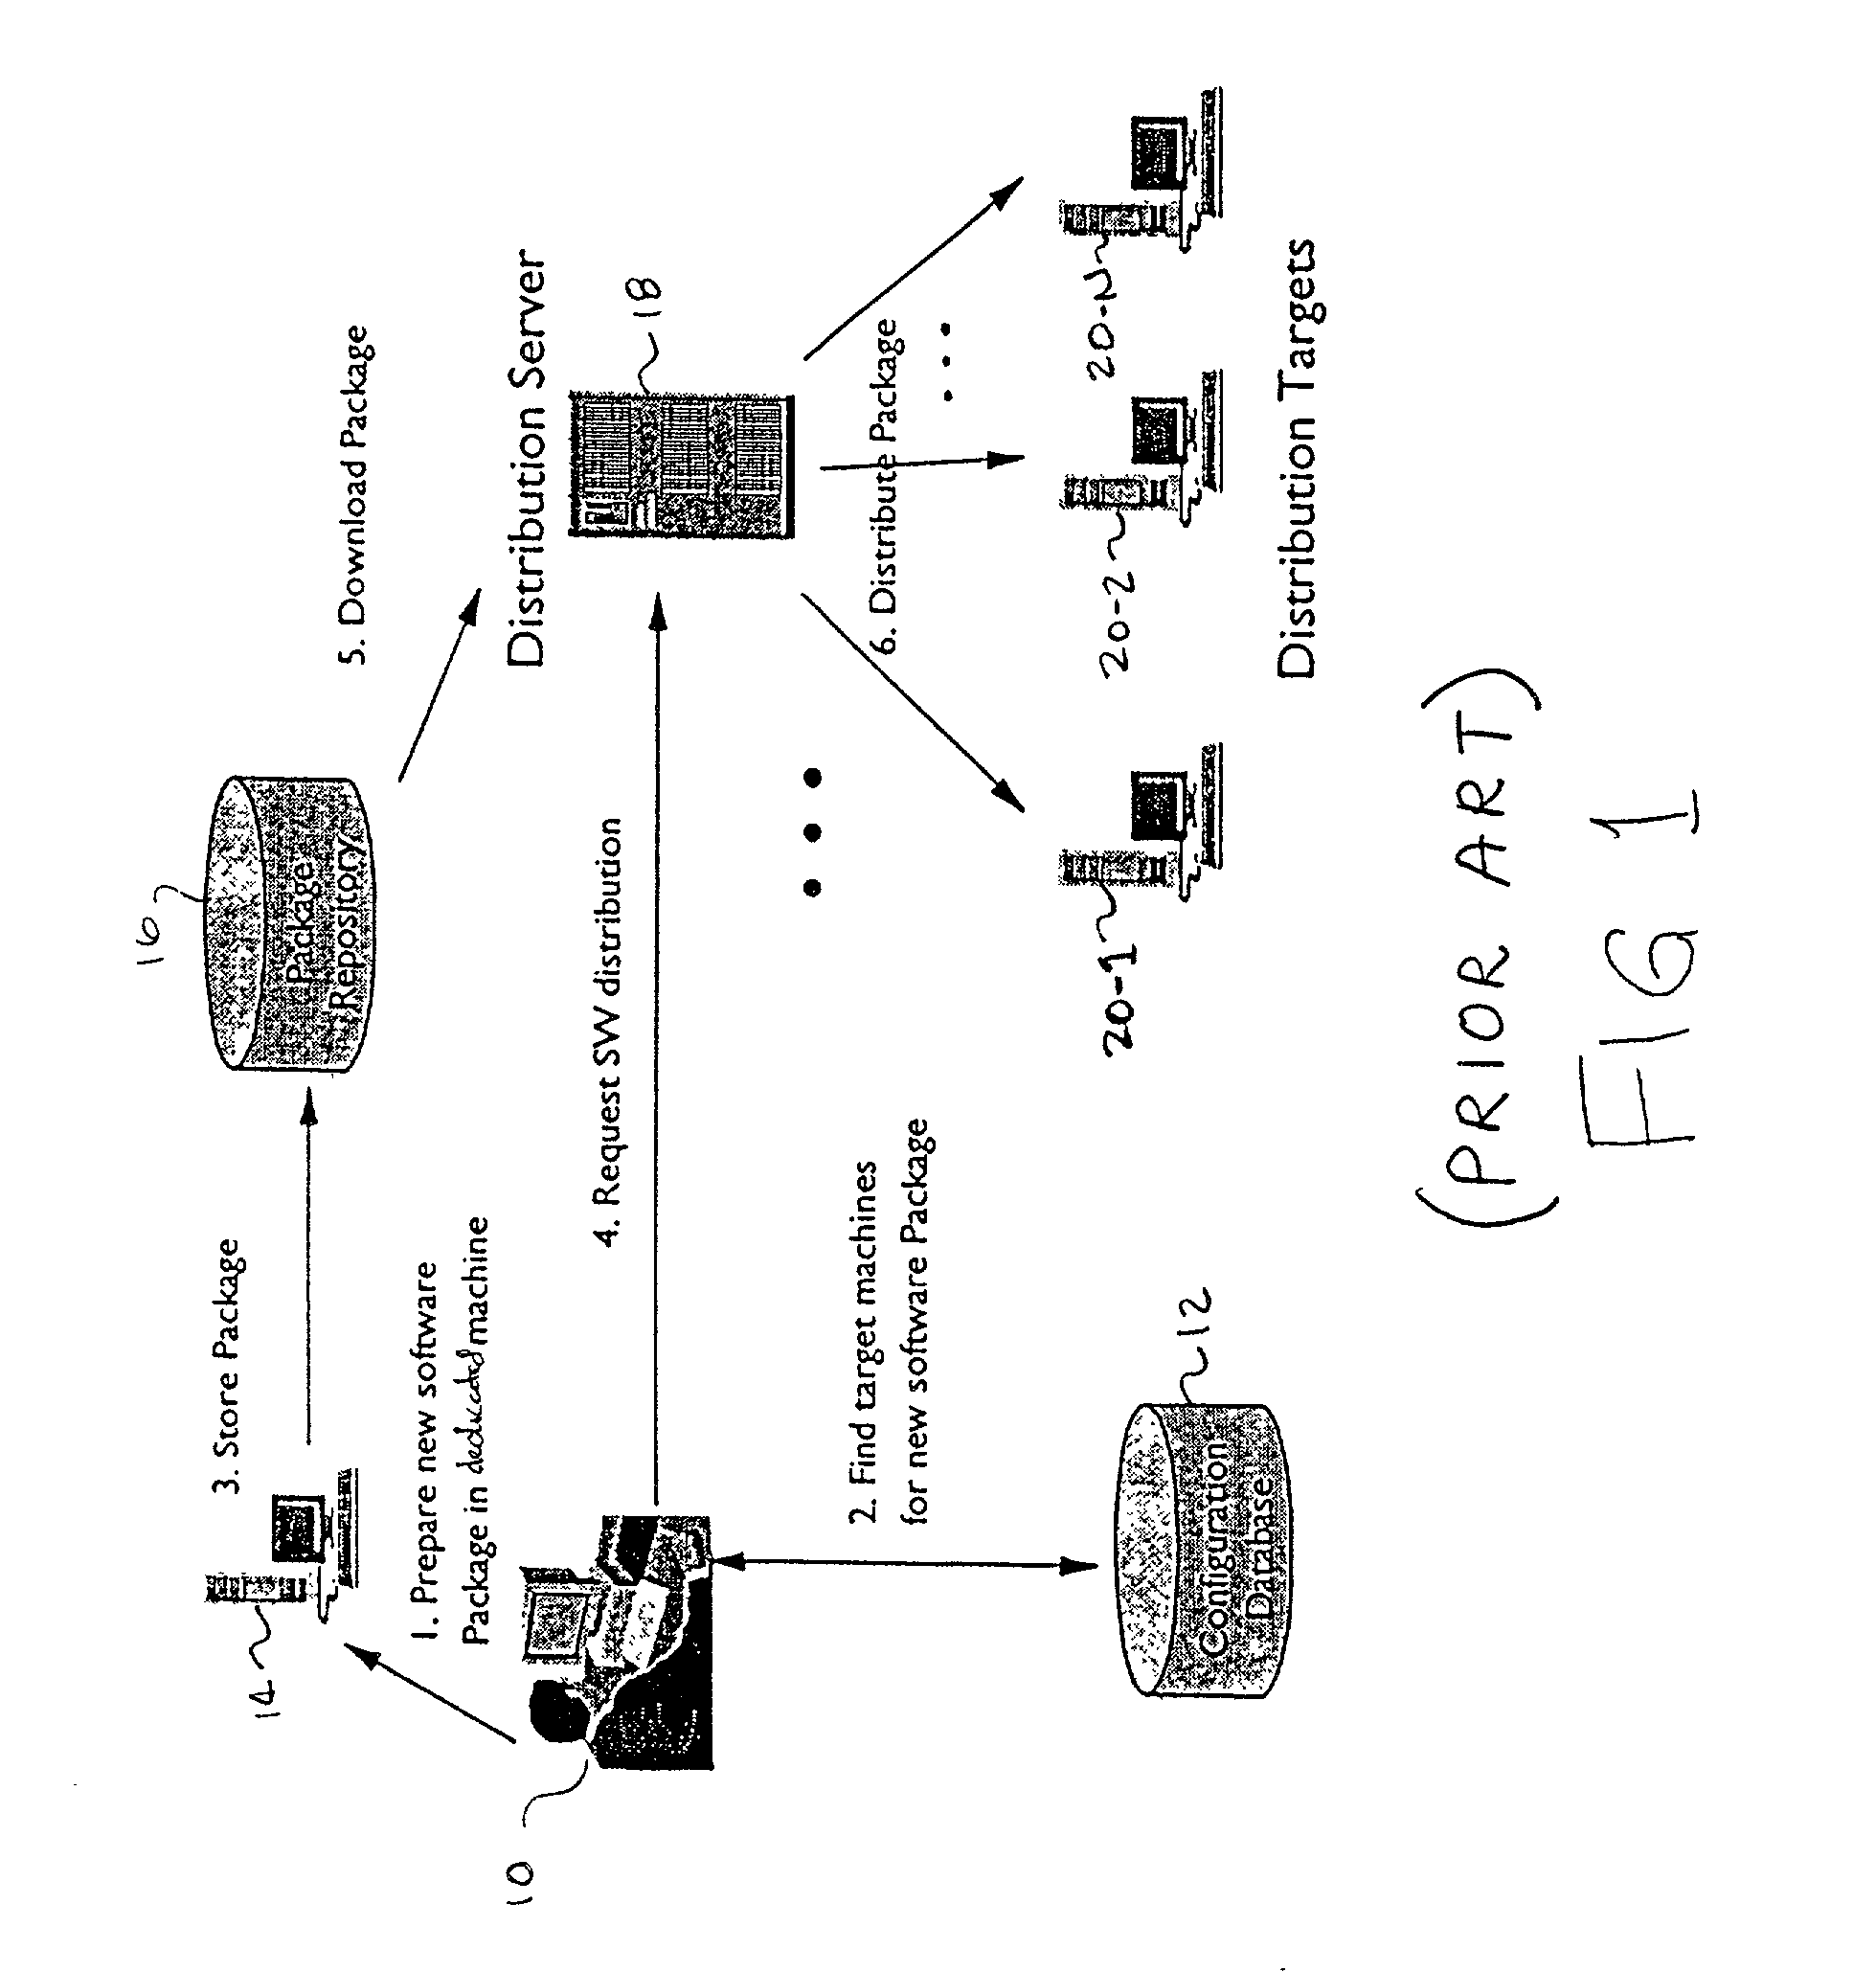 Systems and methods for service and role-based software distribution